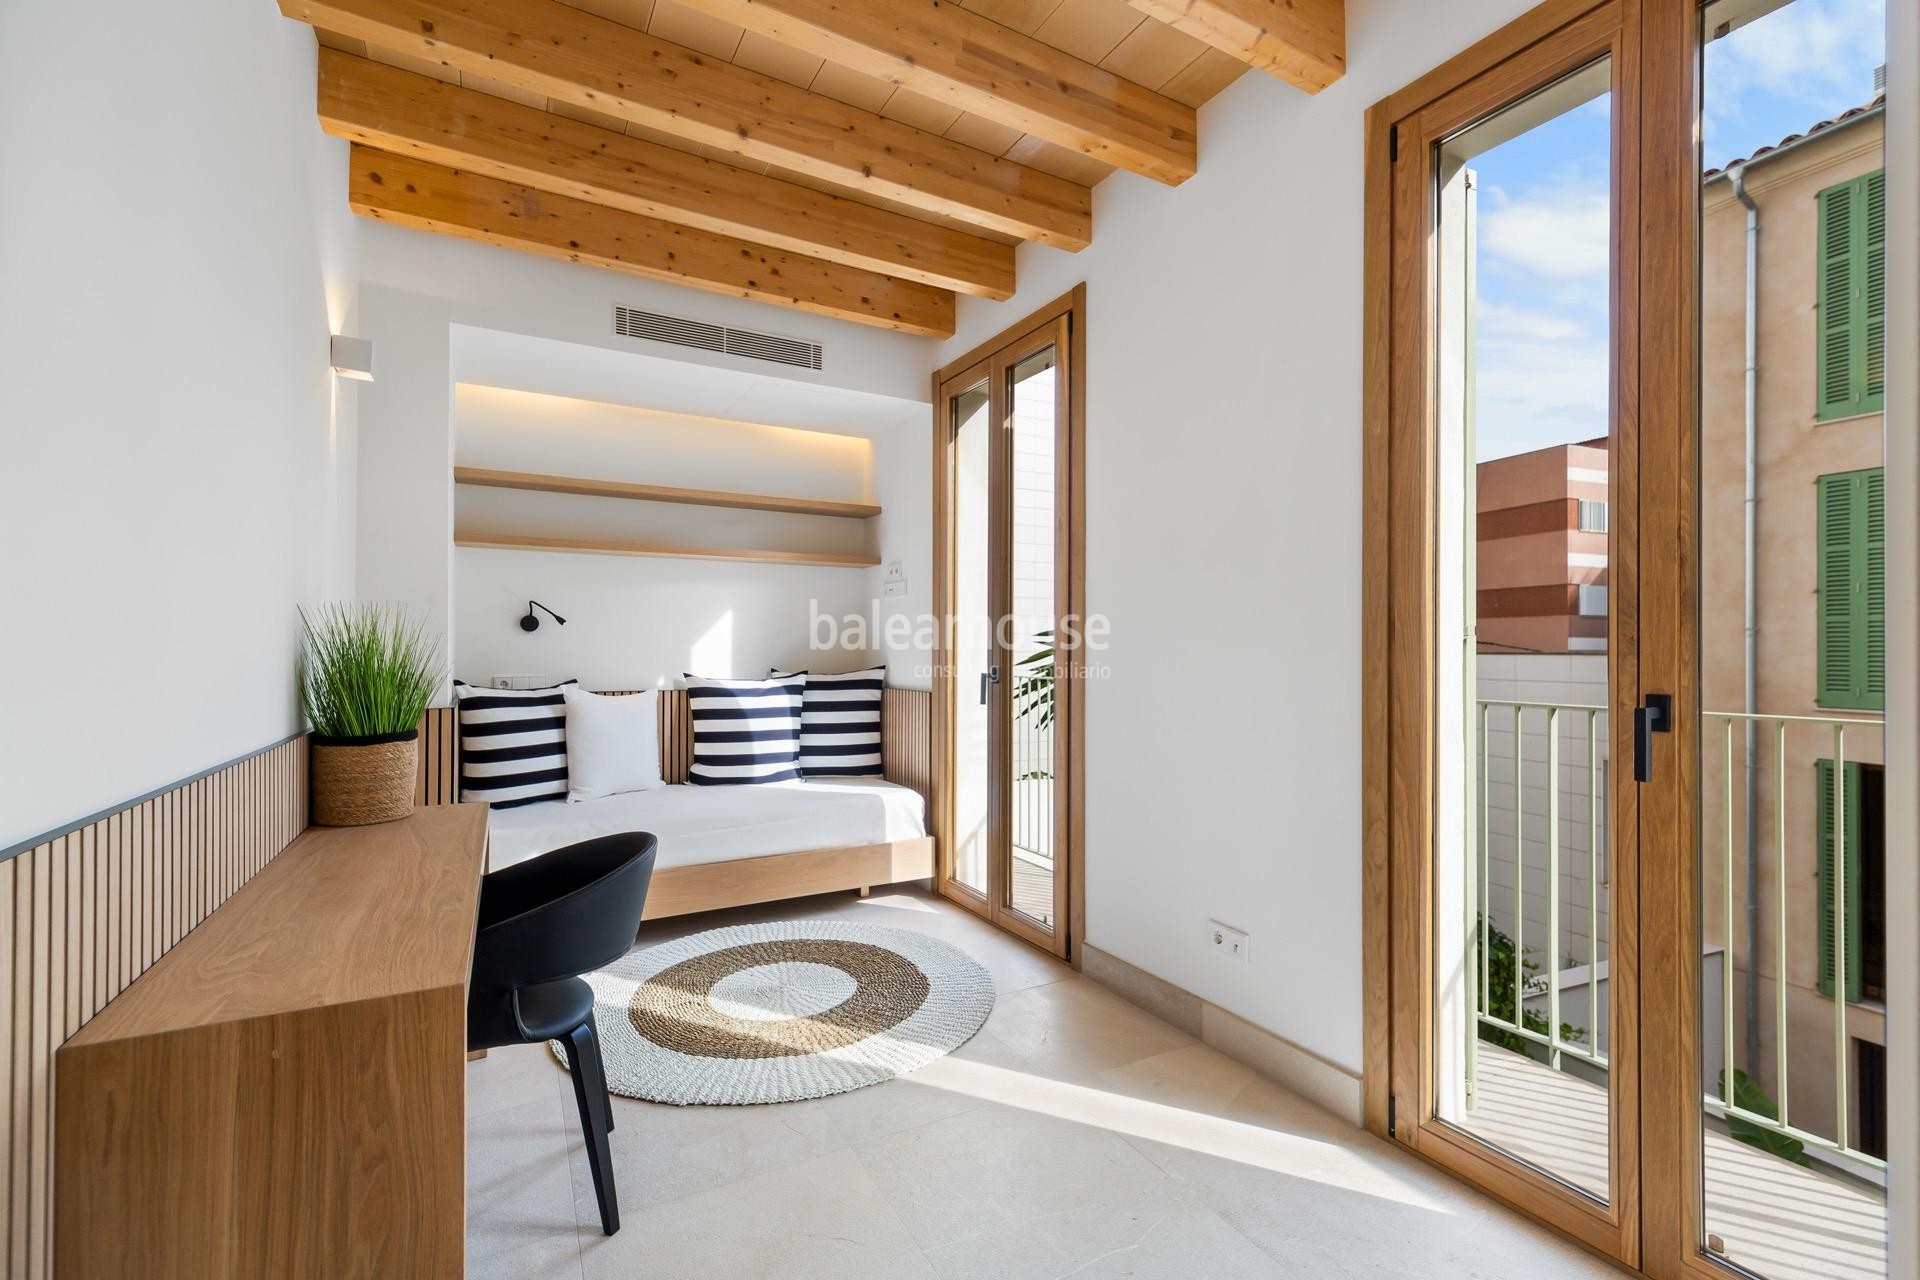 Design and tradition in this exclusive new house in Palma's historic centre